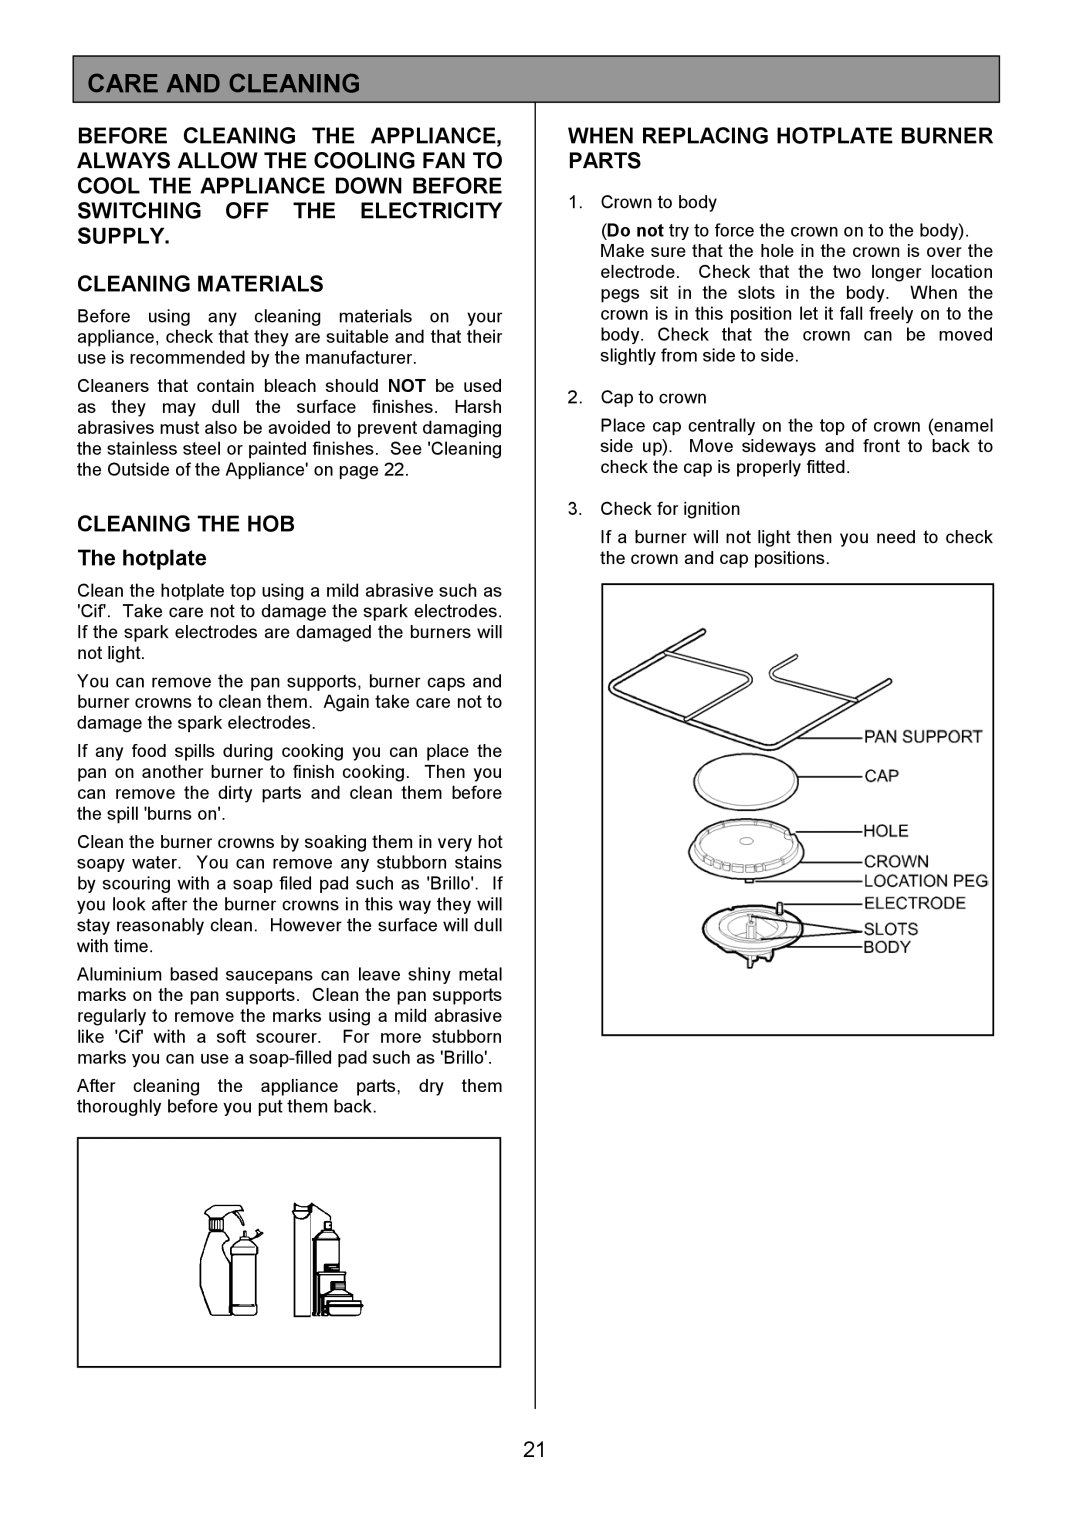 Electrolux SM 554 installation instructions Care and Cleaning, Cleaning the HOB, When Replacing Hotplate Burner Parts 